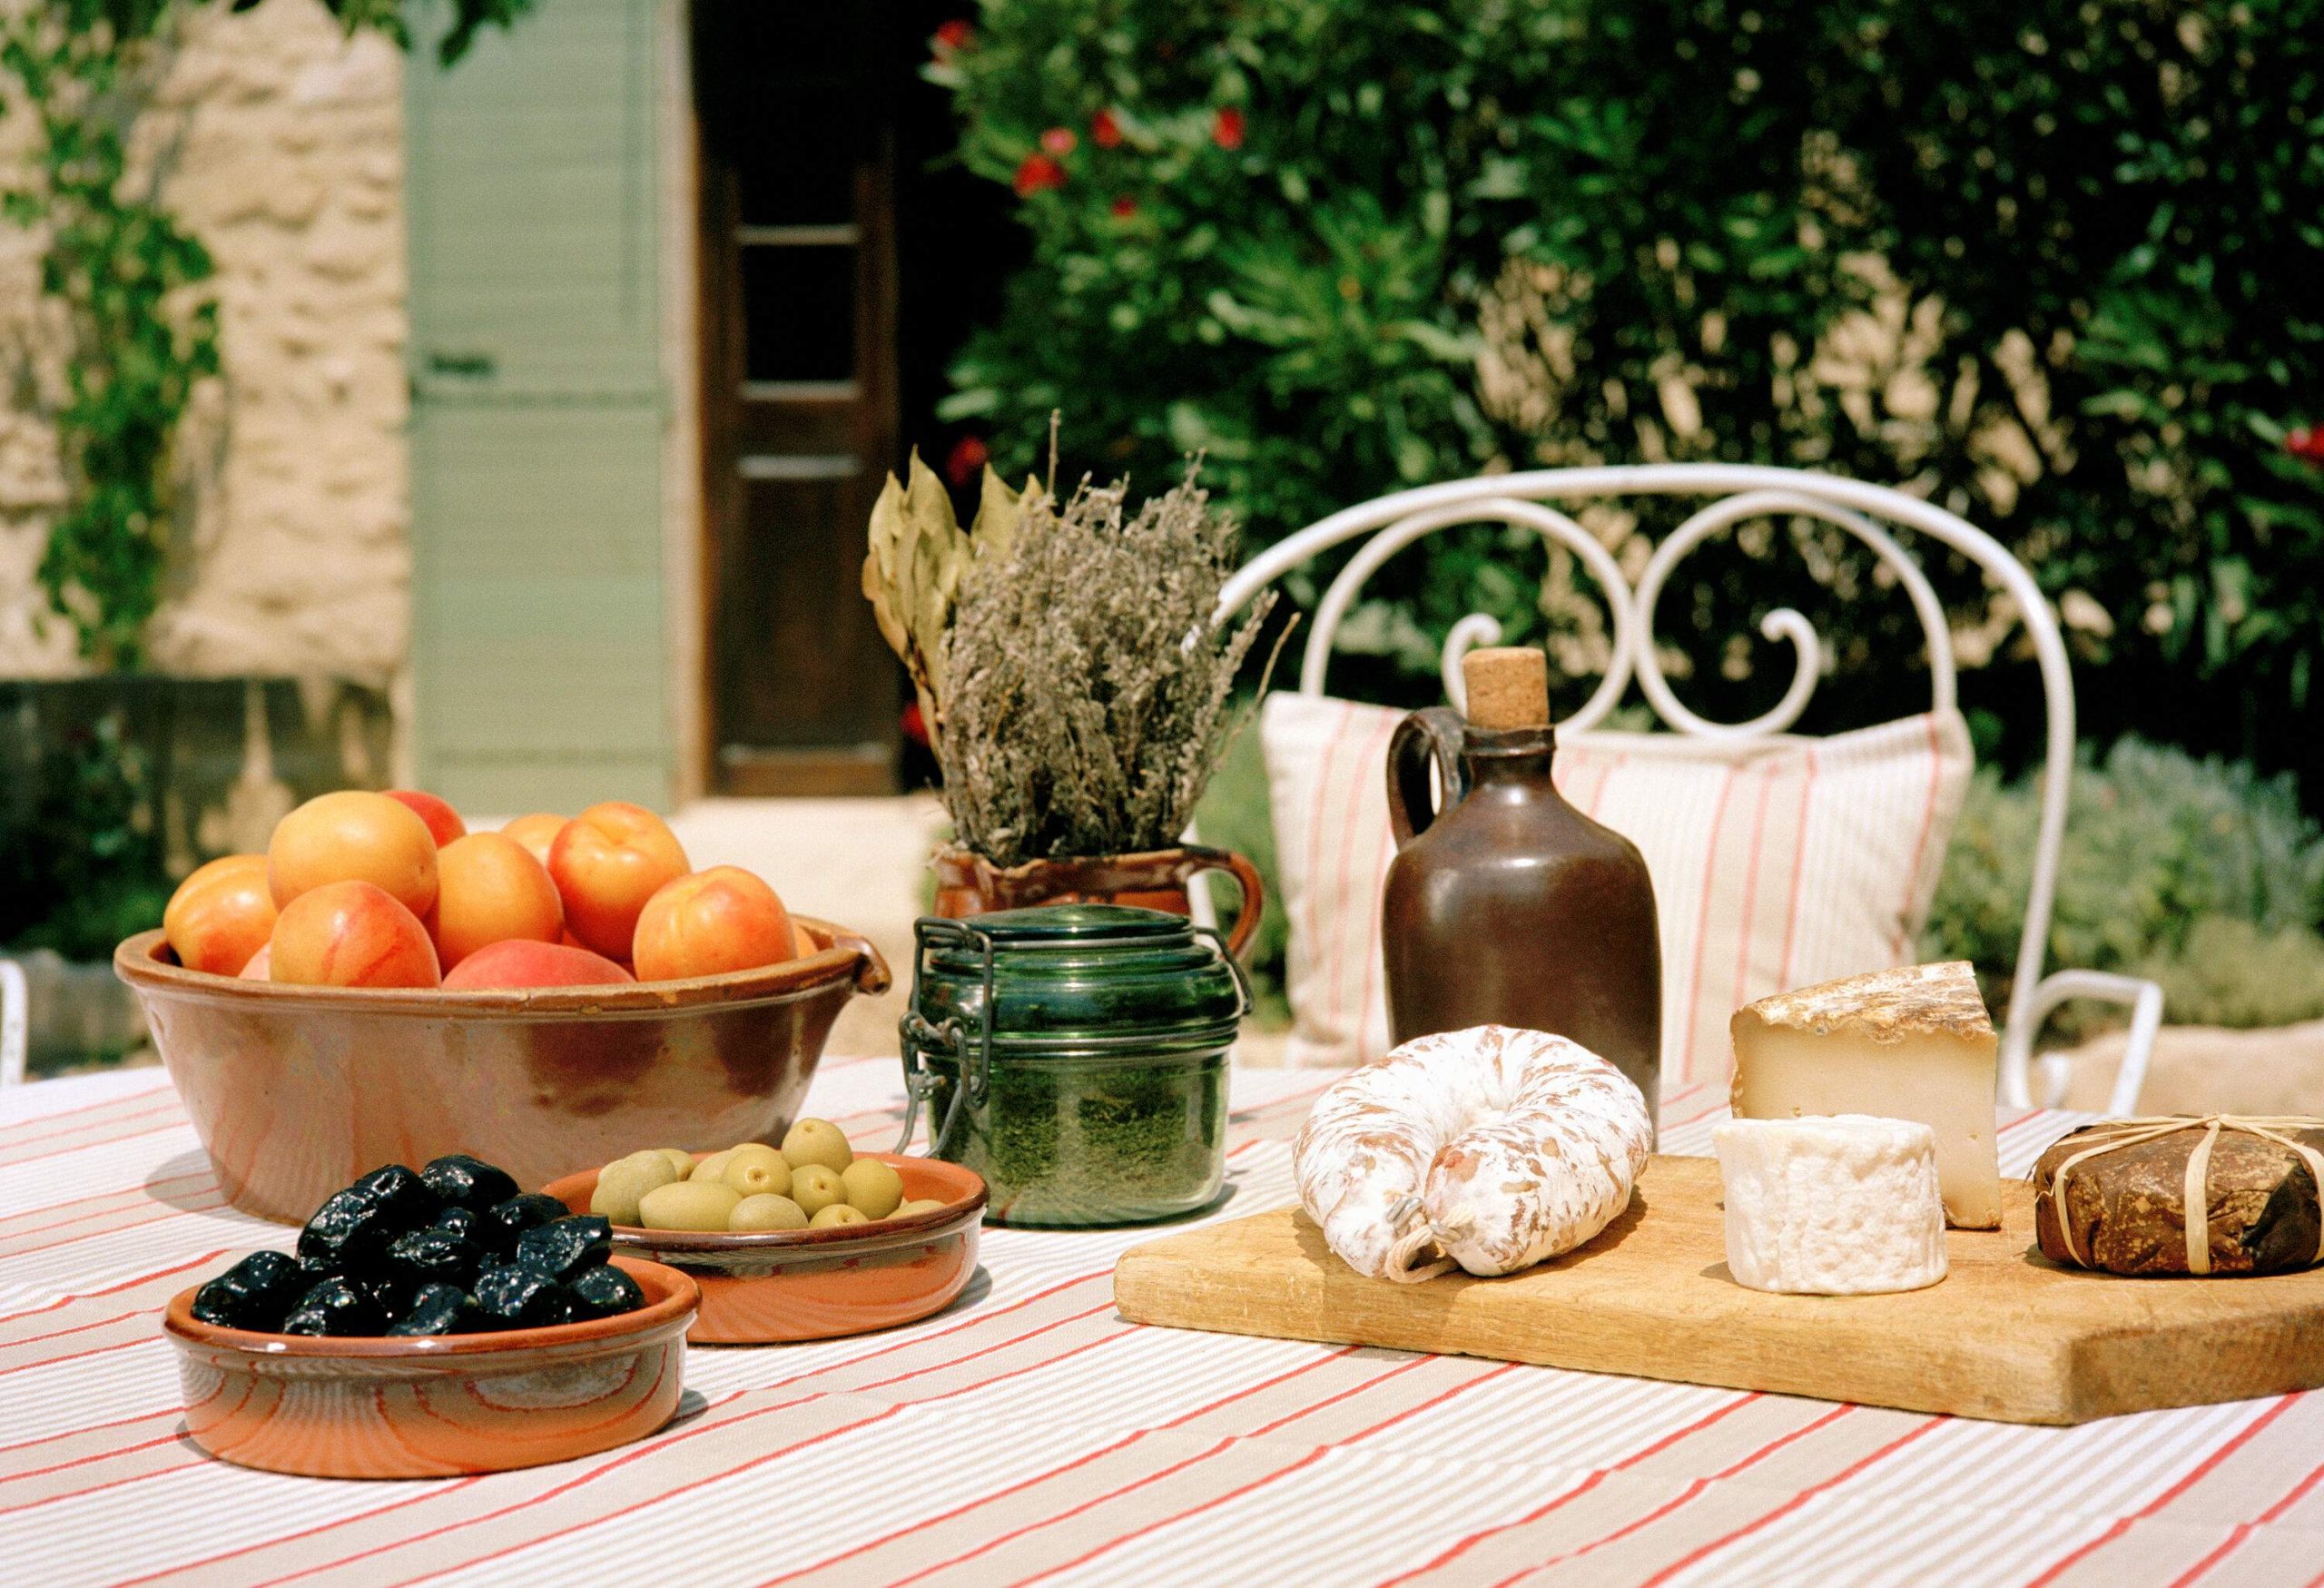 A cloth-covered outdoor table with various fruits, cheese, and a jar.